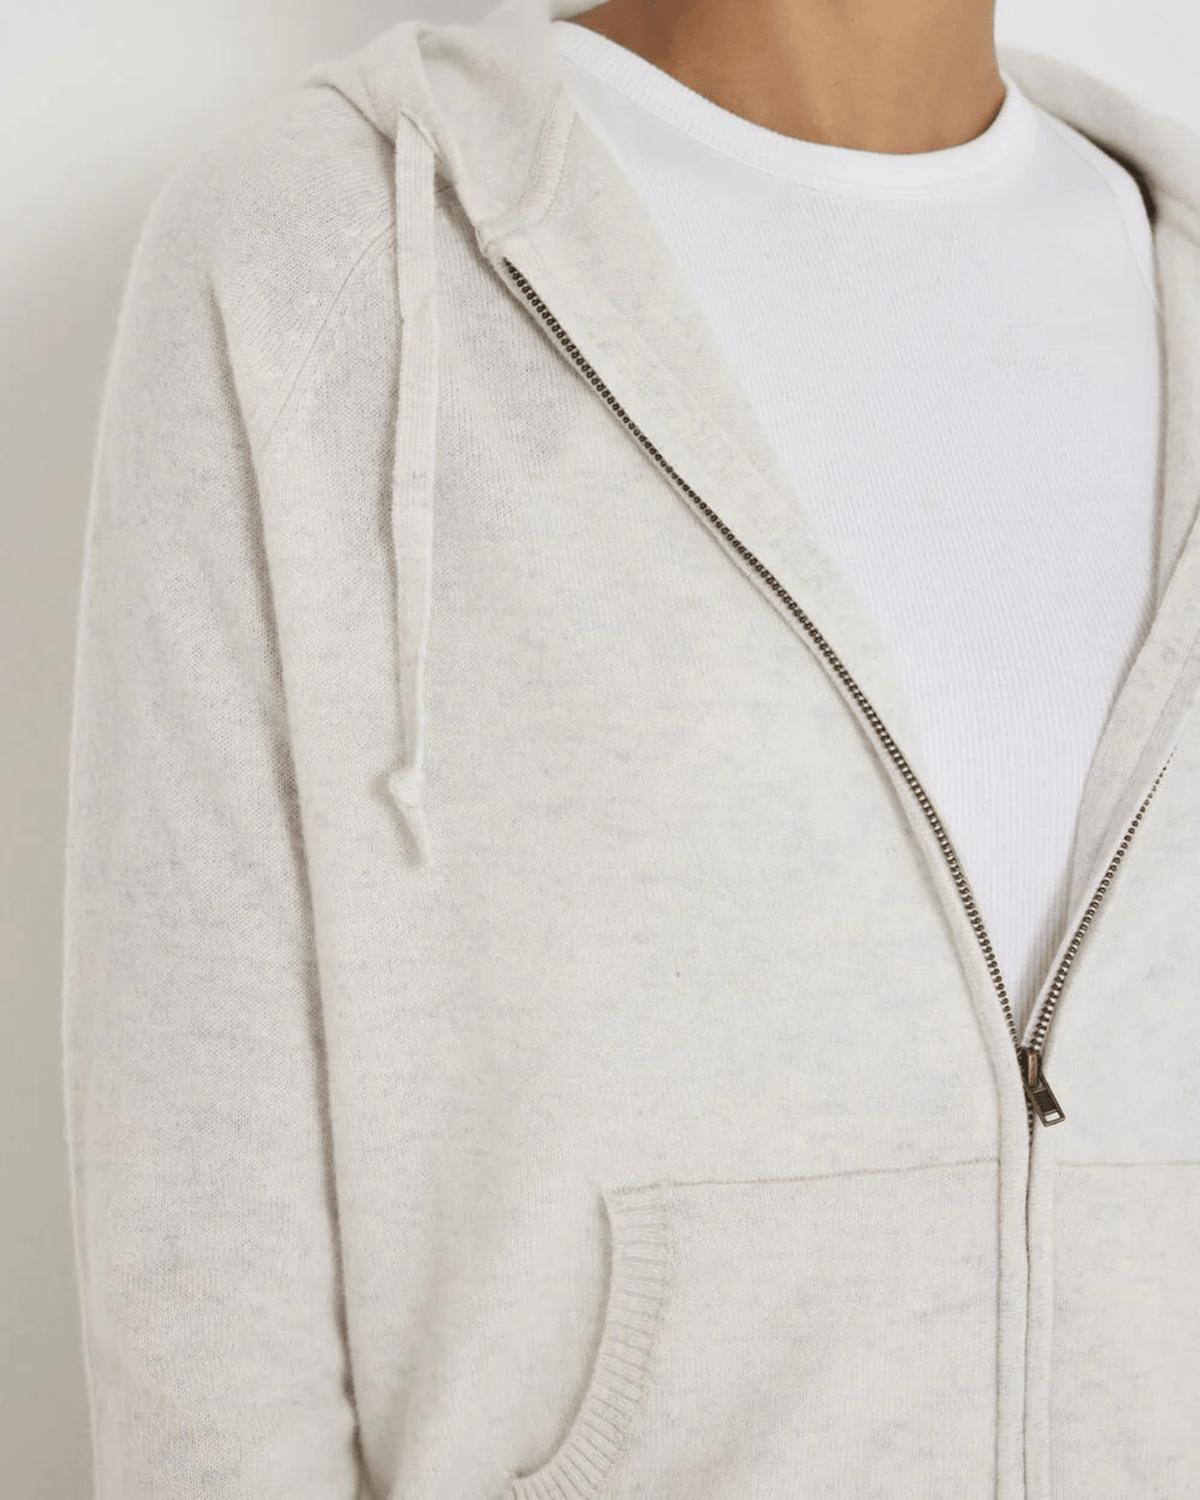 Not Monday Clothing Greyson Cashmere Zip Hoodie in Light Grey